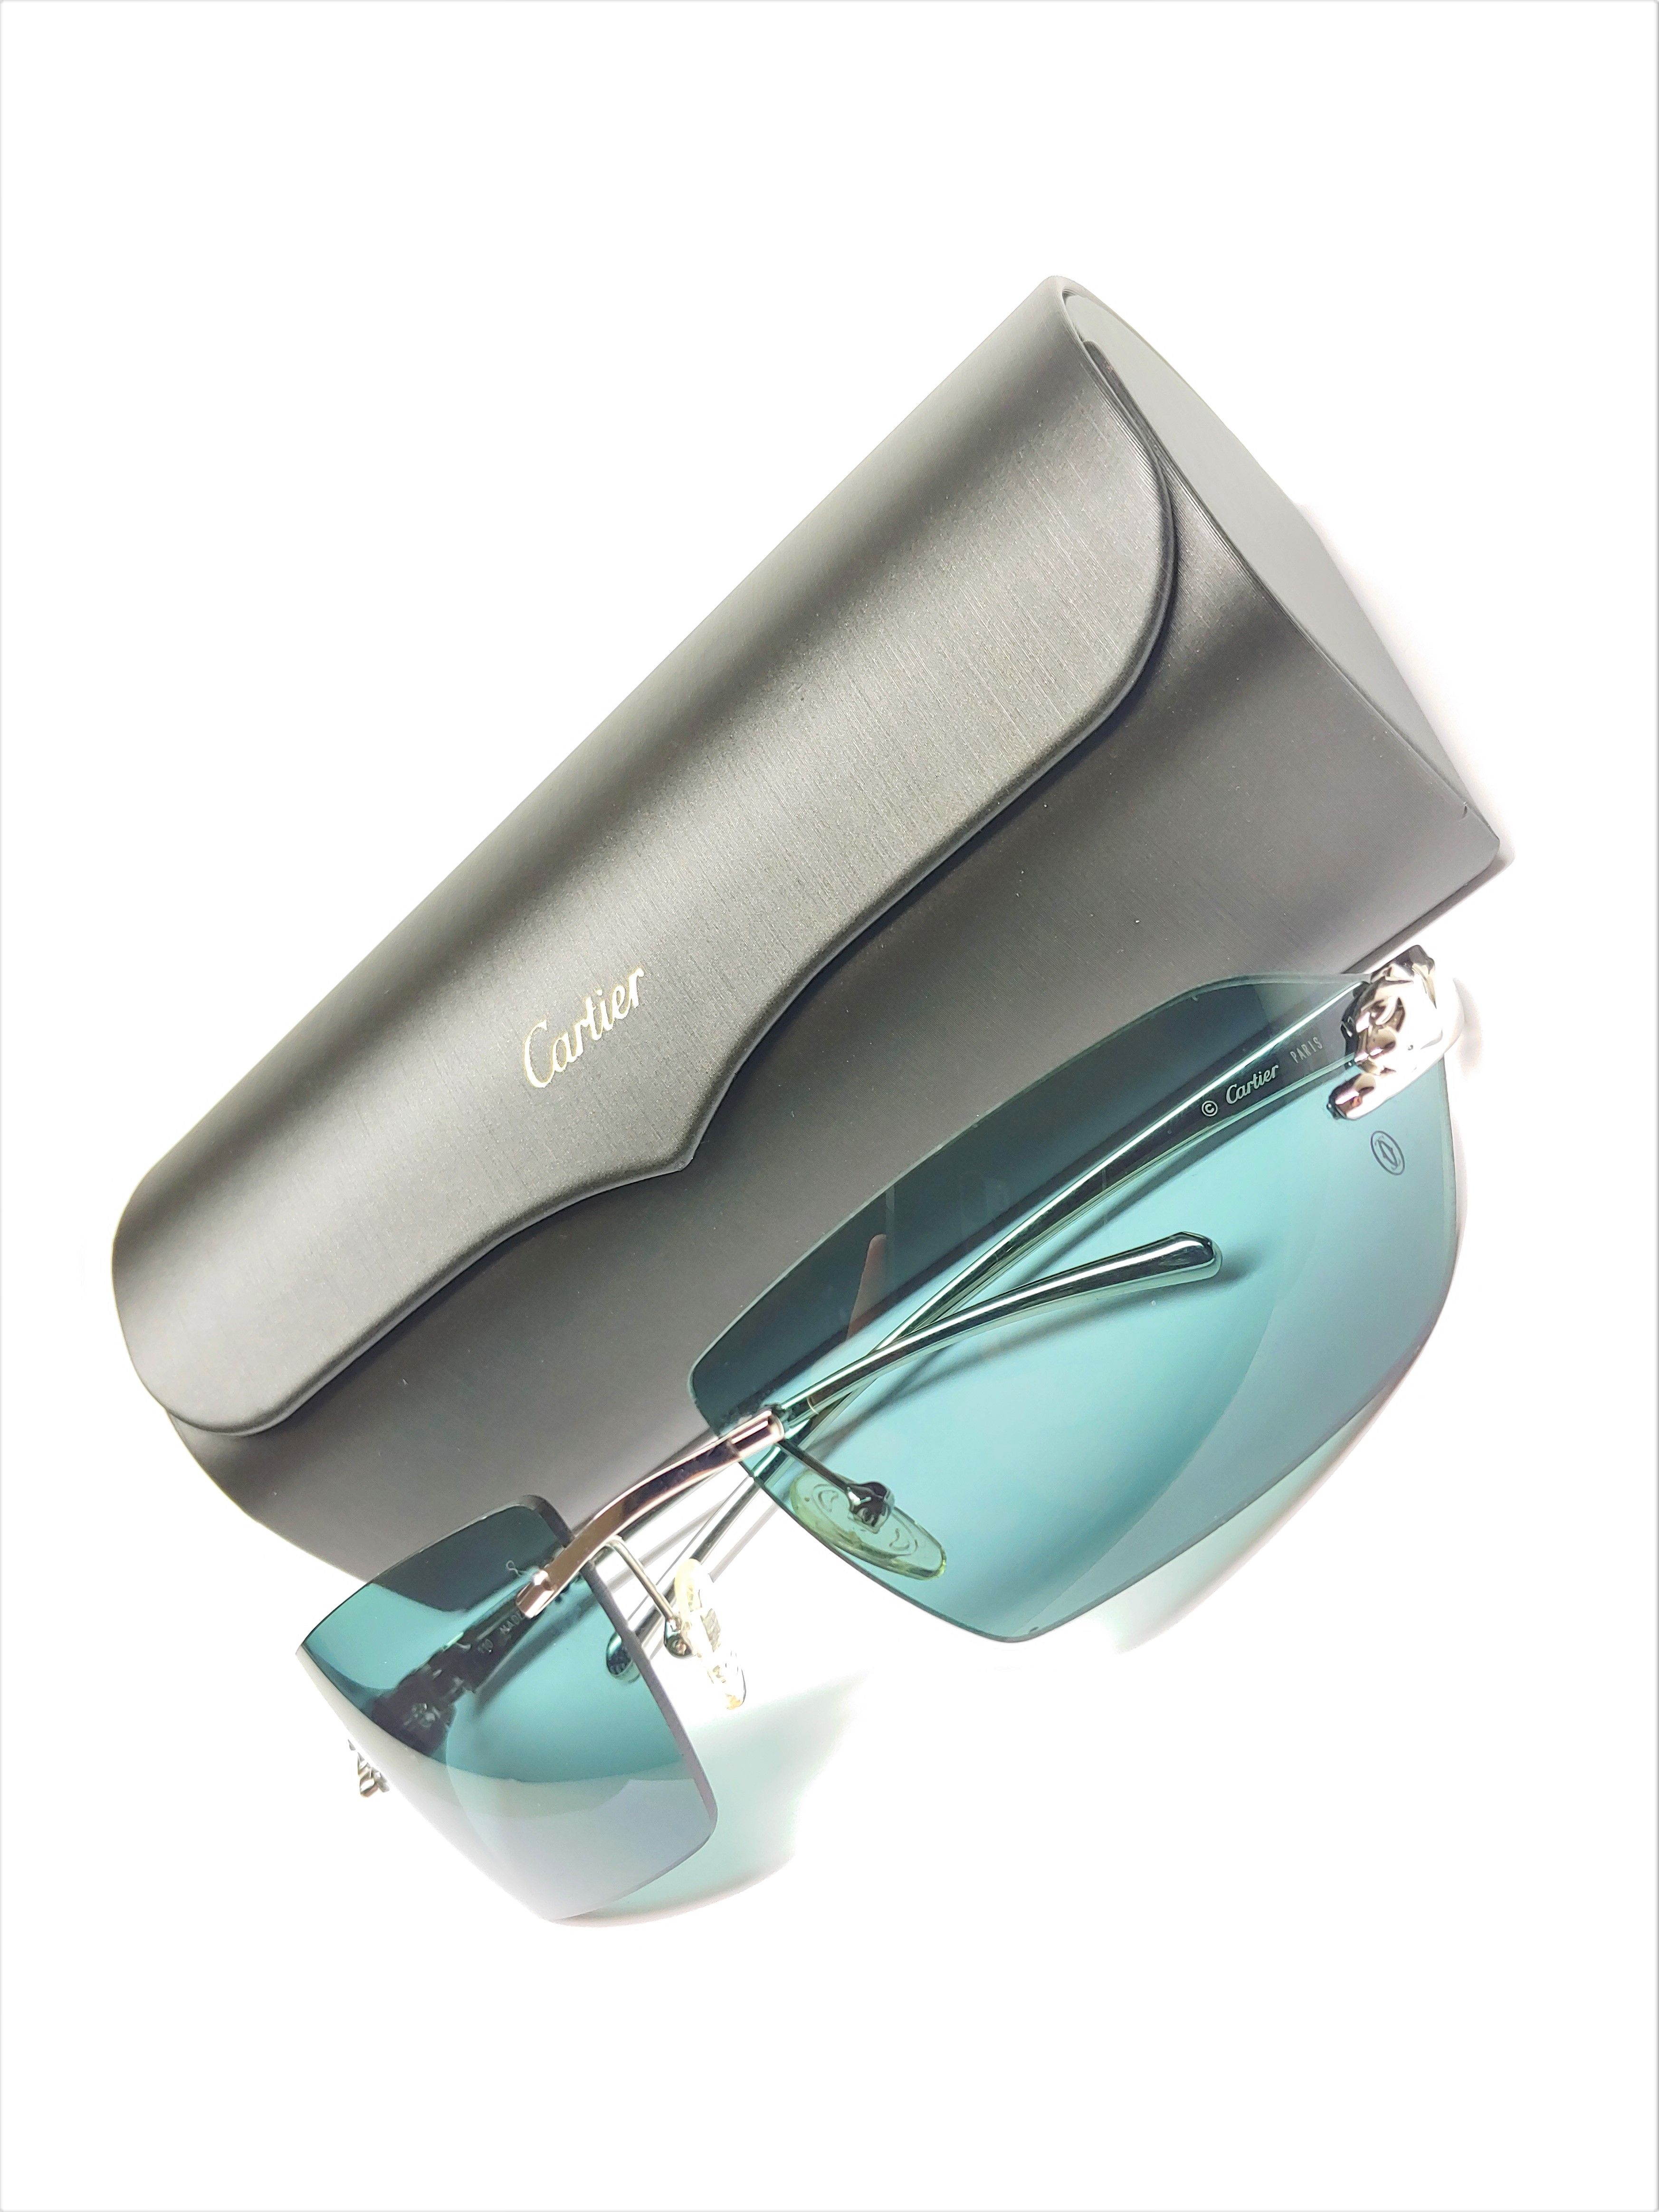 CARTIER LIMITED EDITION 110 PANTHER SUNGLASSES | eBay